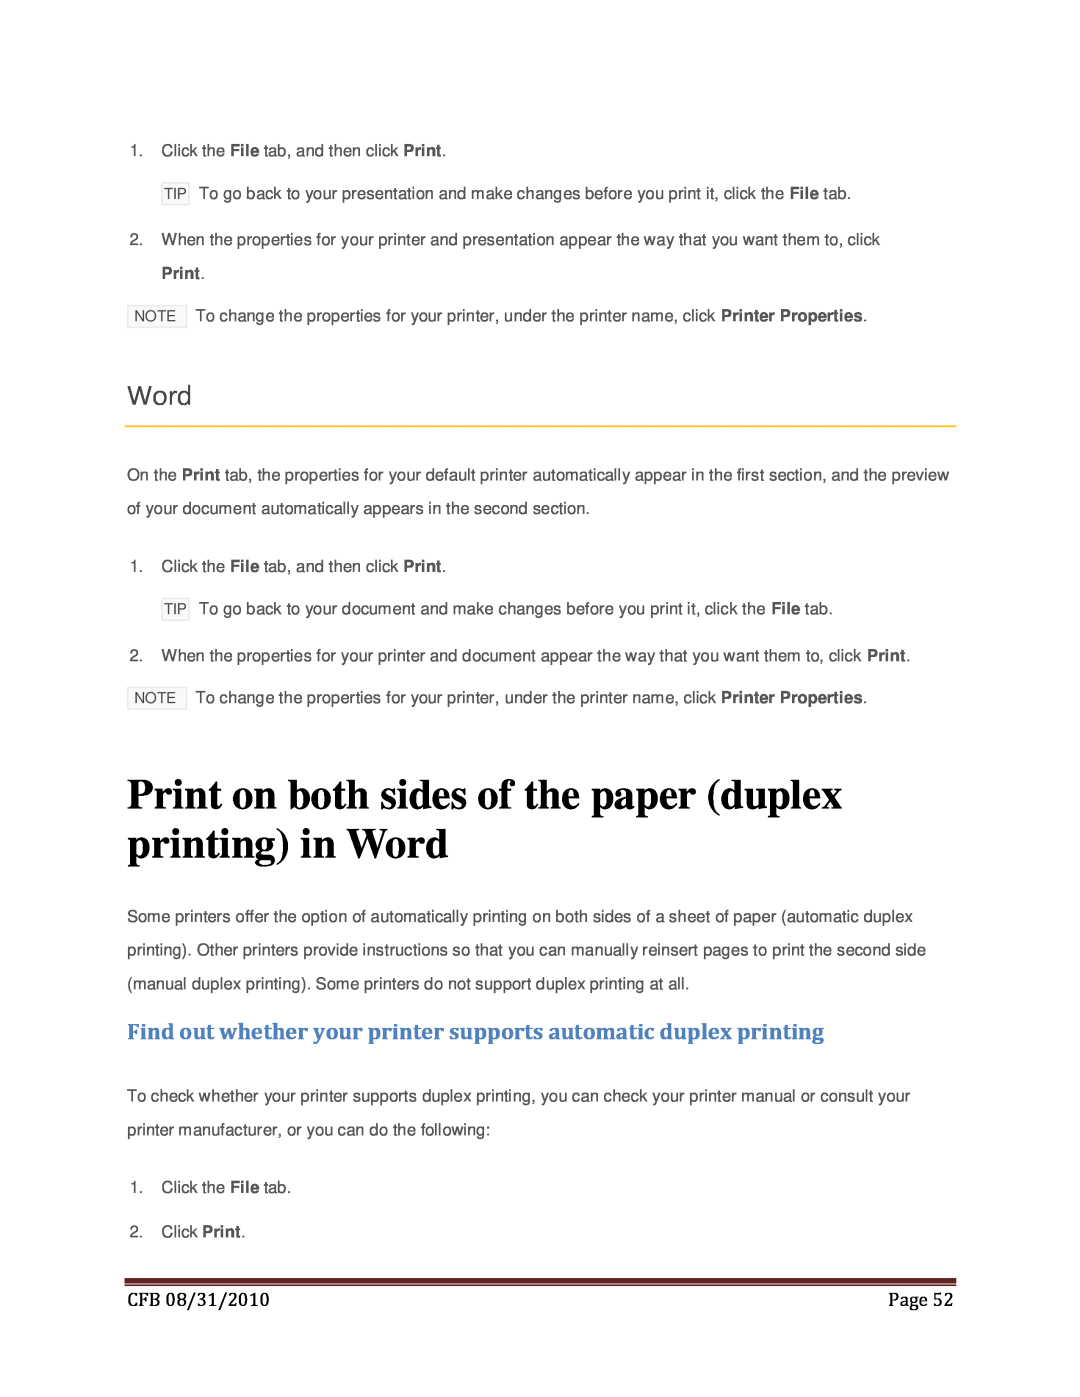 Microsoft T5D-00295, 79G-02020, 269-14457 Print on both sides of the paper duplex printing in Word, CFB 08/31/2010, Page 